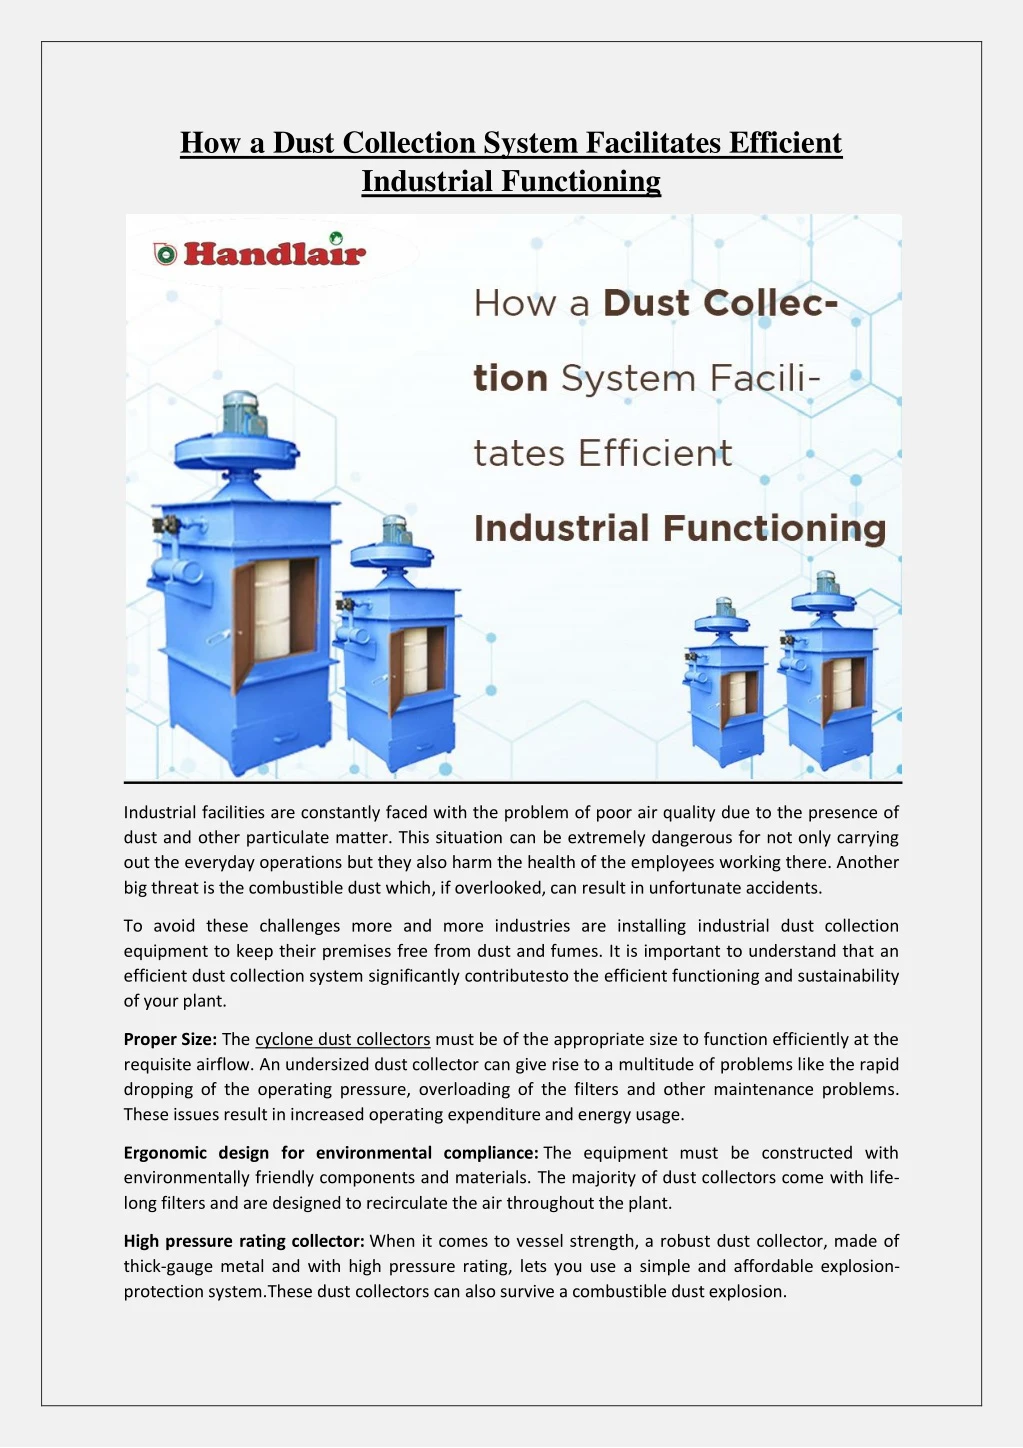 how a dust collection system facilitates